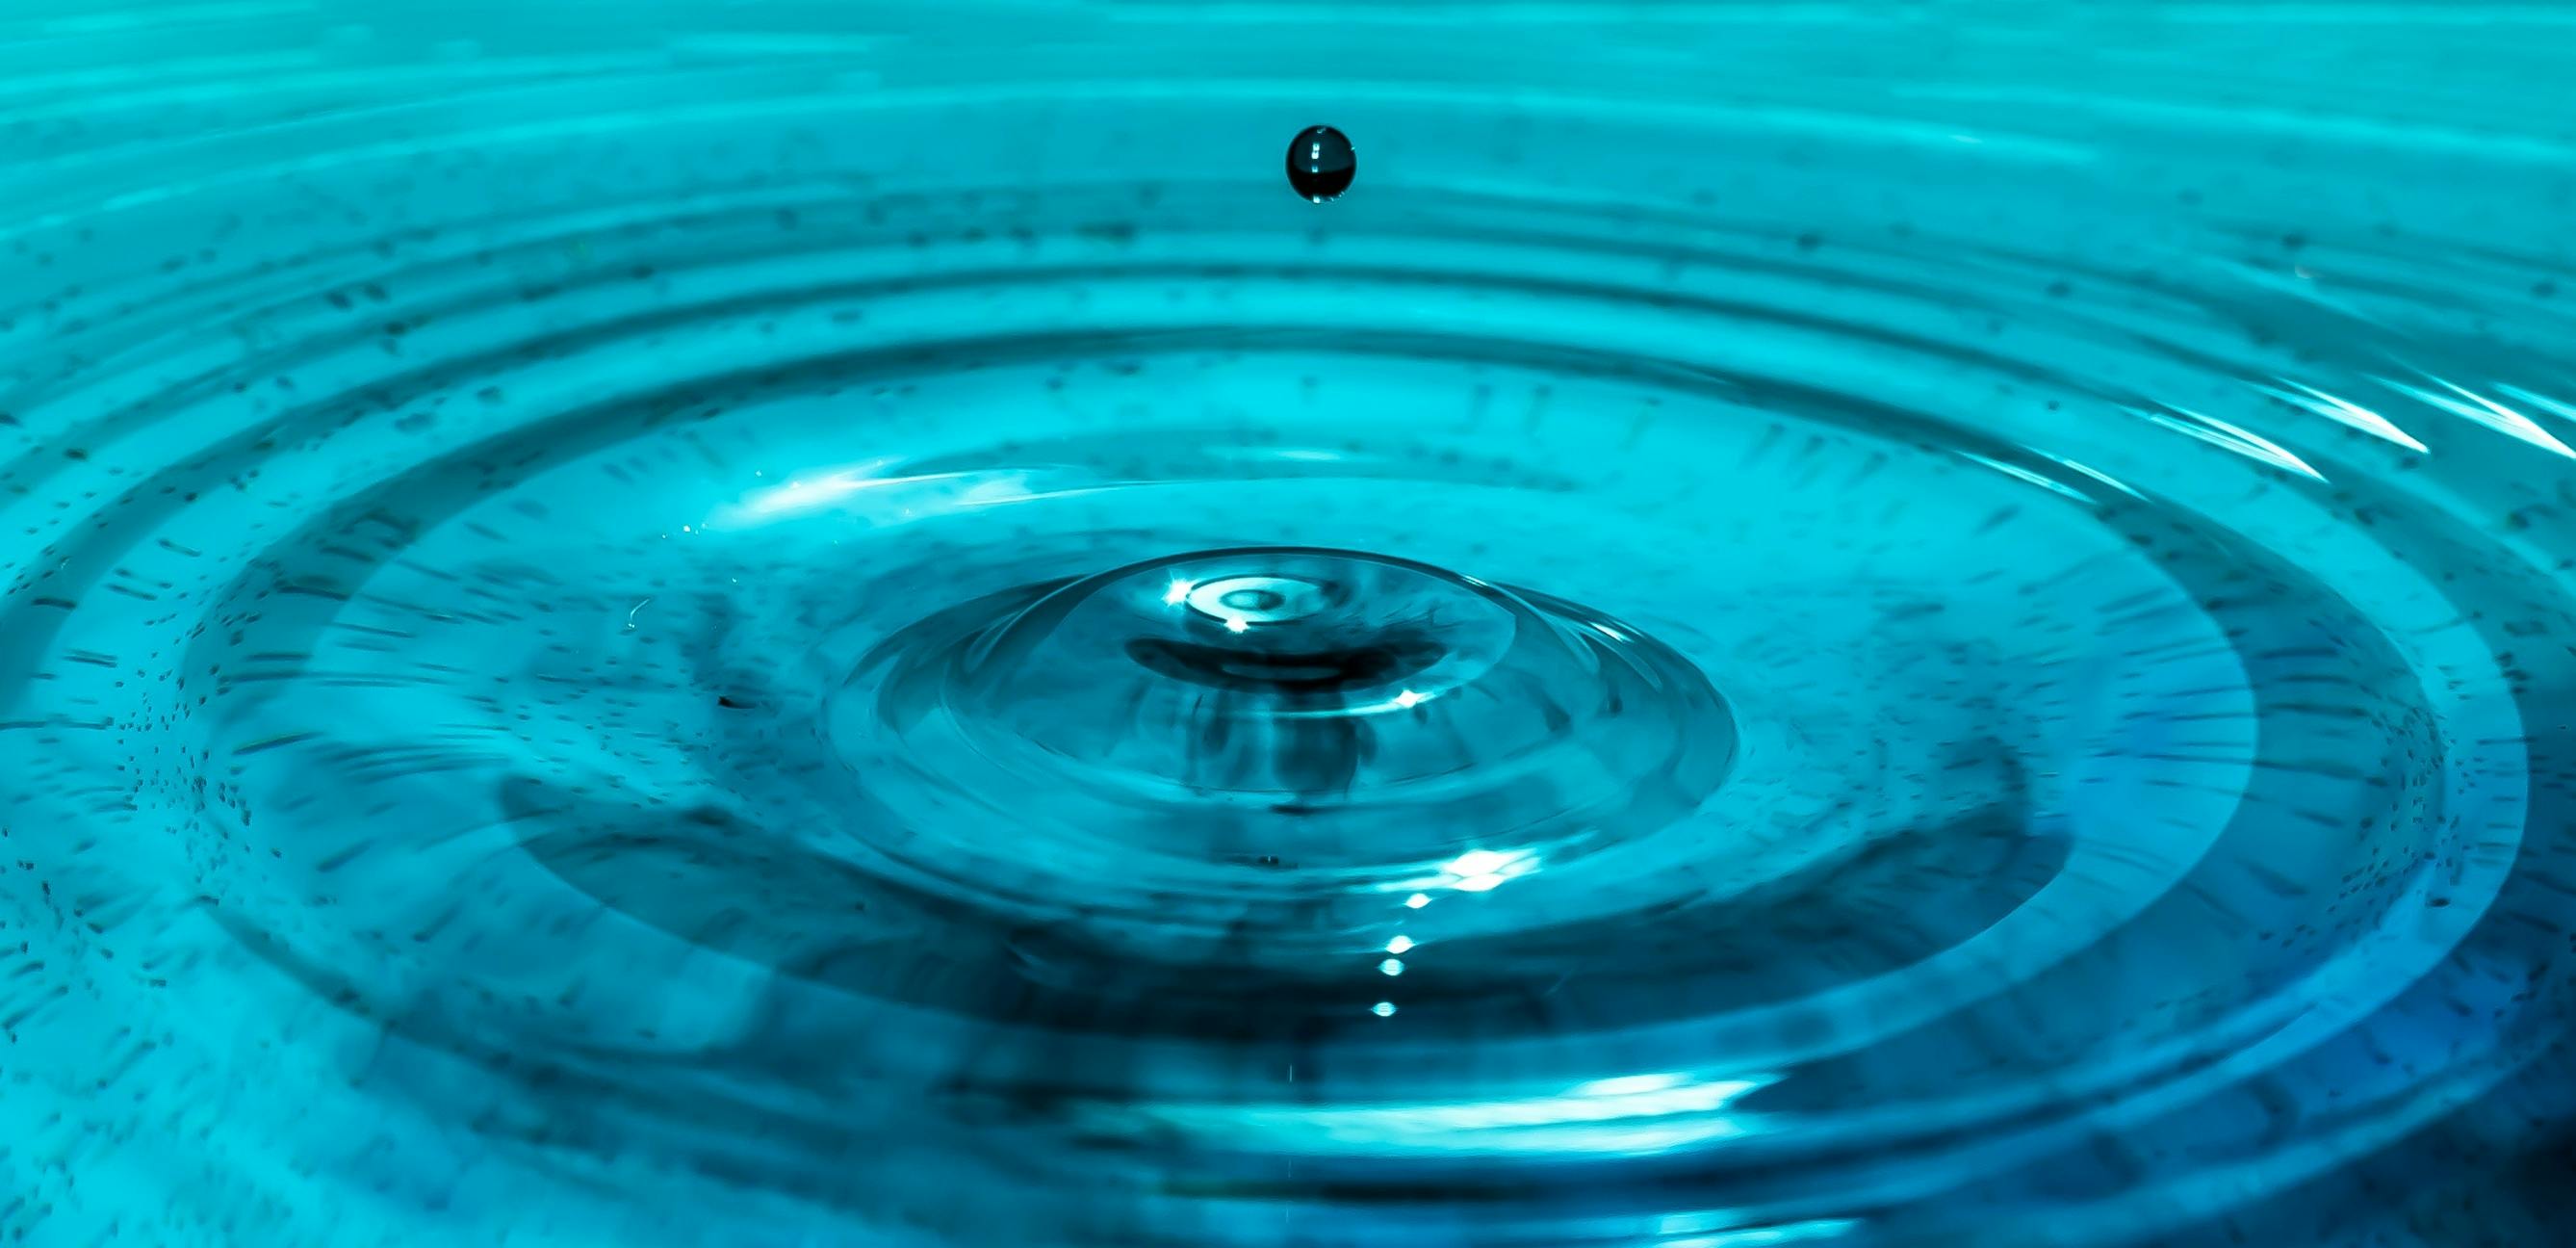 a close up of a water drop in a pool, teal energy, rippling electromagnetic, water gushing from ceiling, sapphire waters below